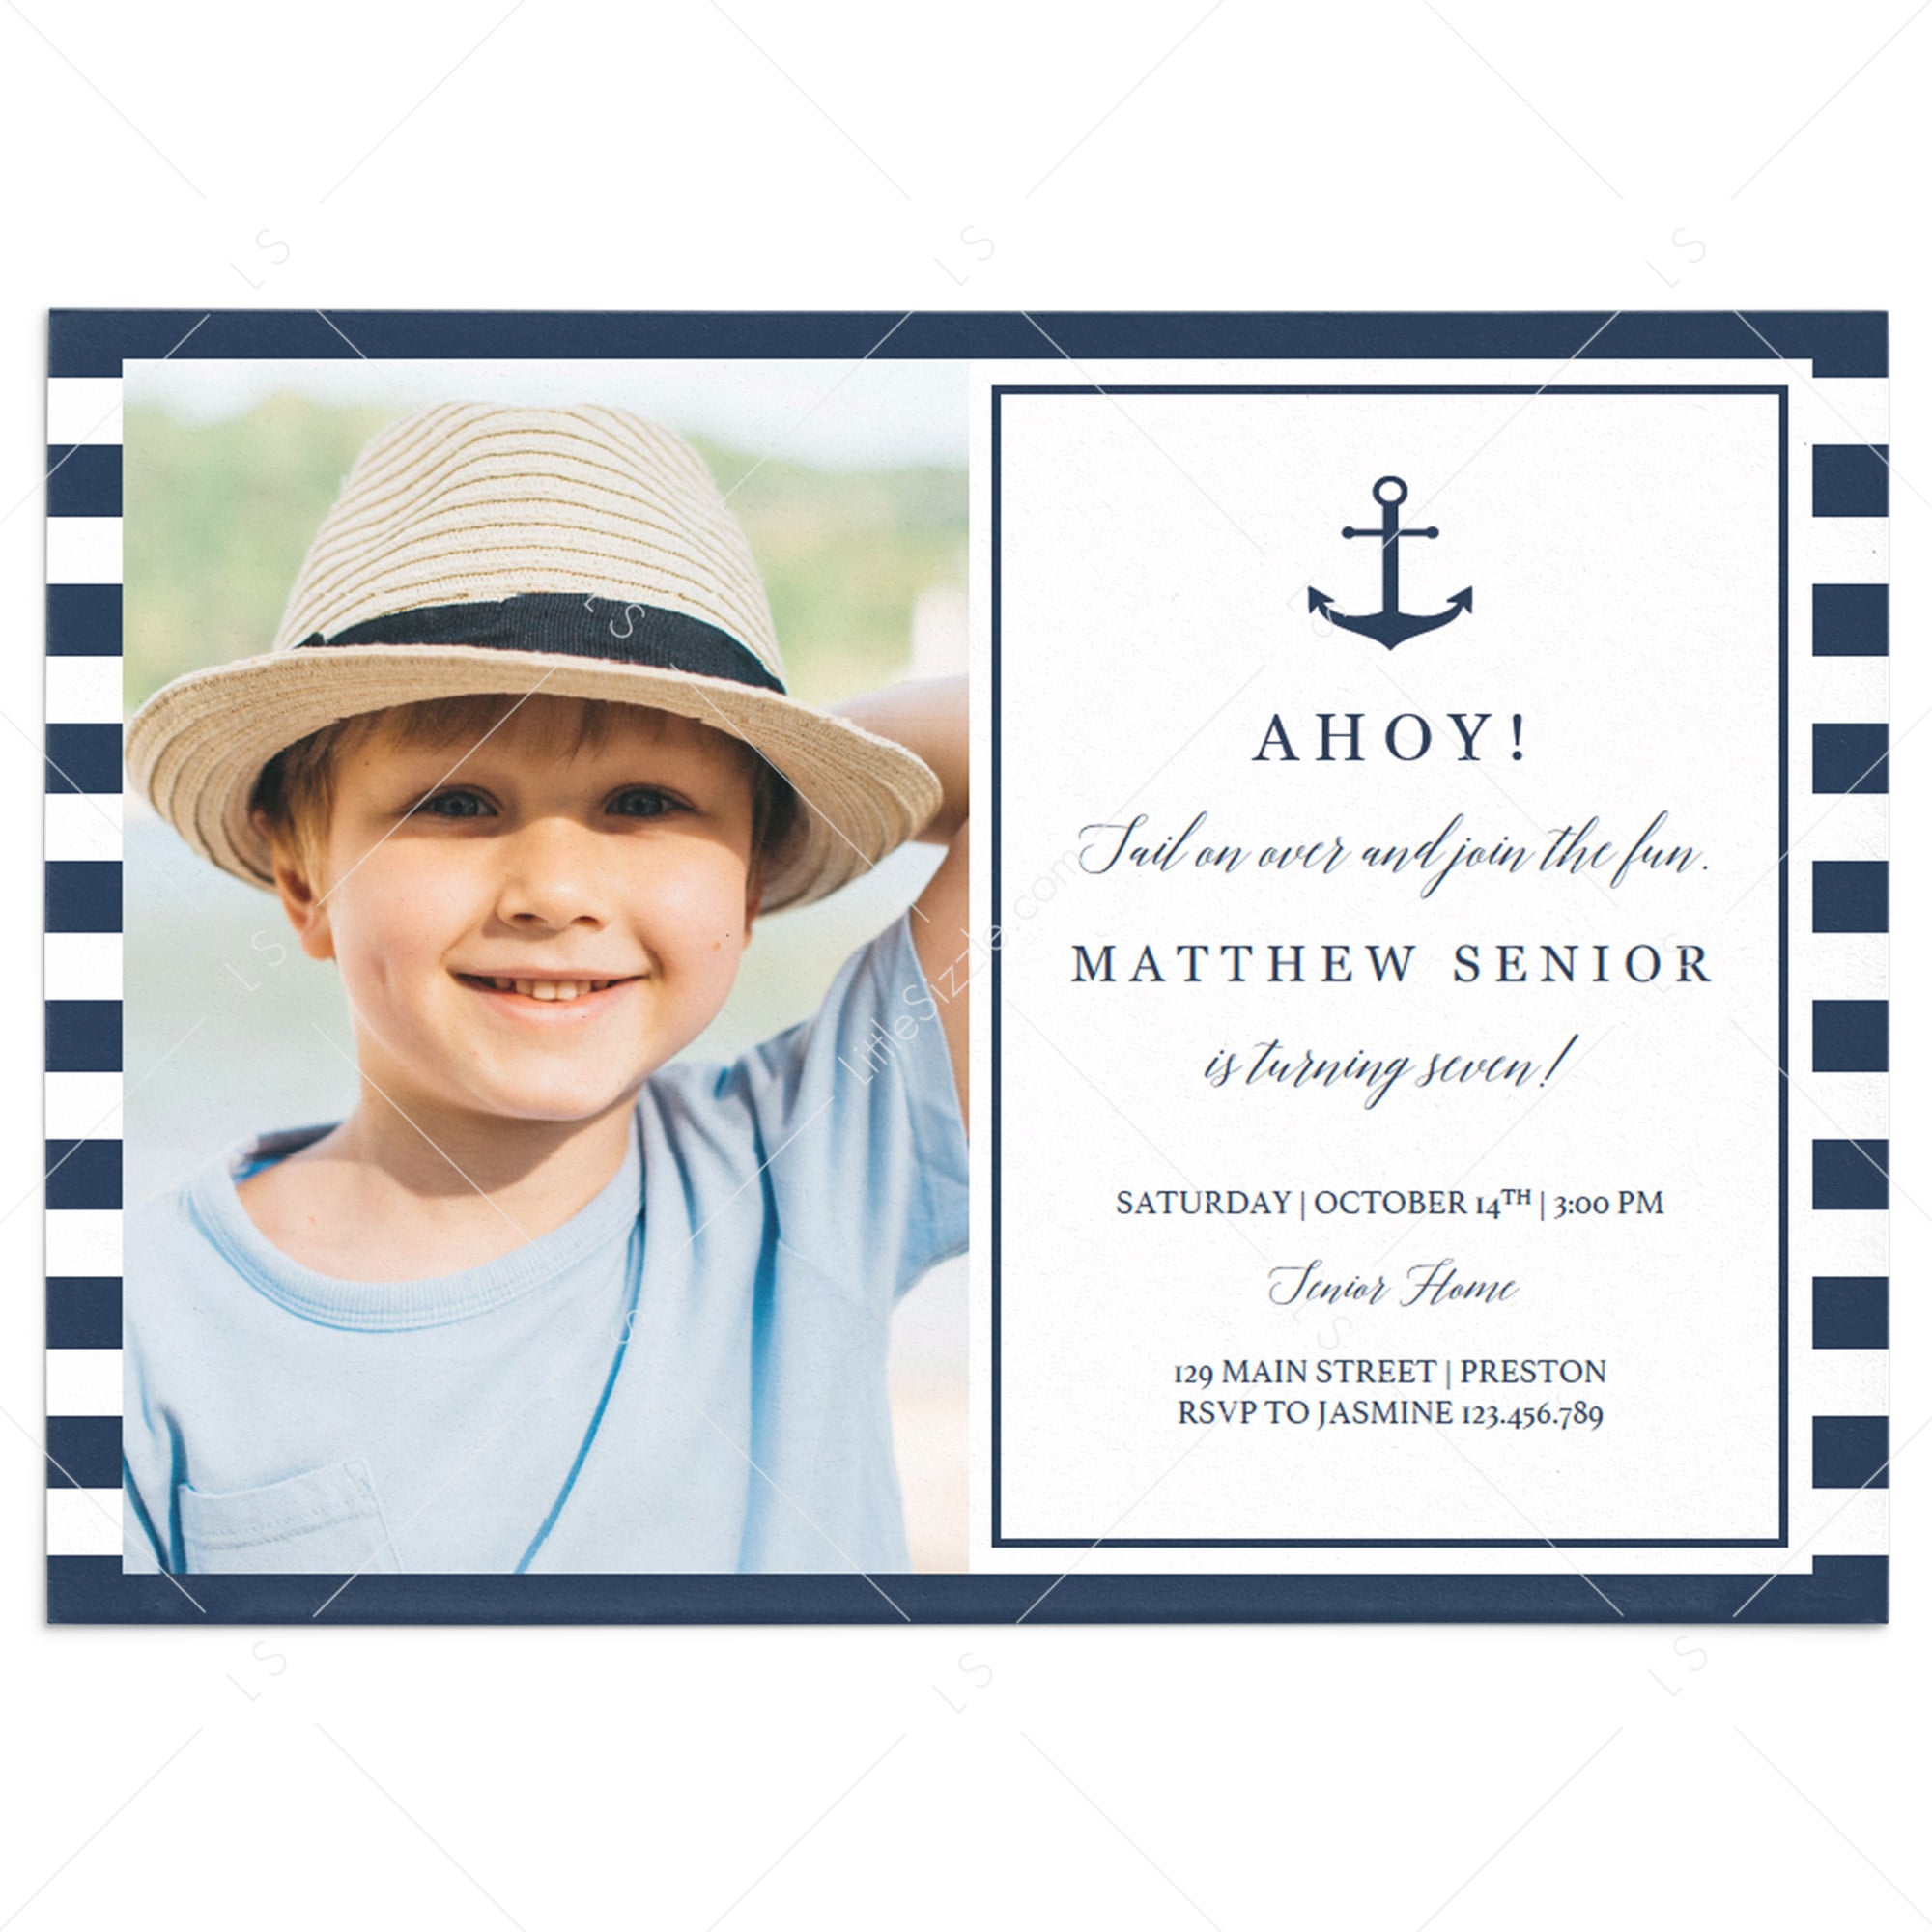 Nautical Birthday Invitation with Photo Editable Template by LittleSizzle